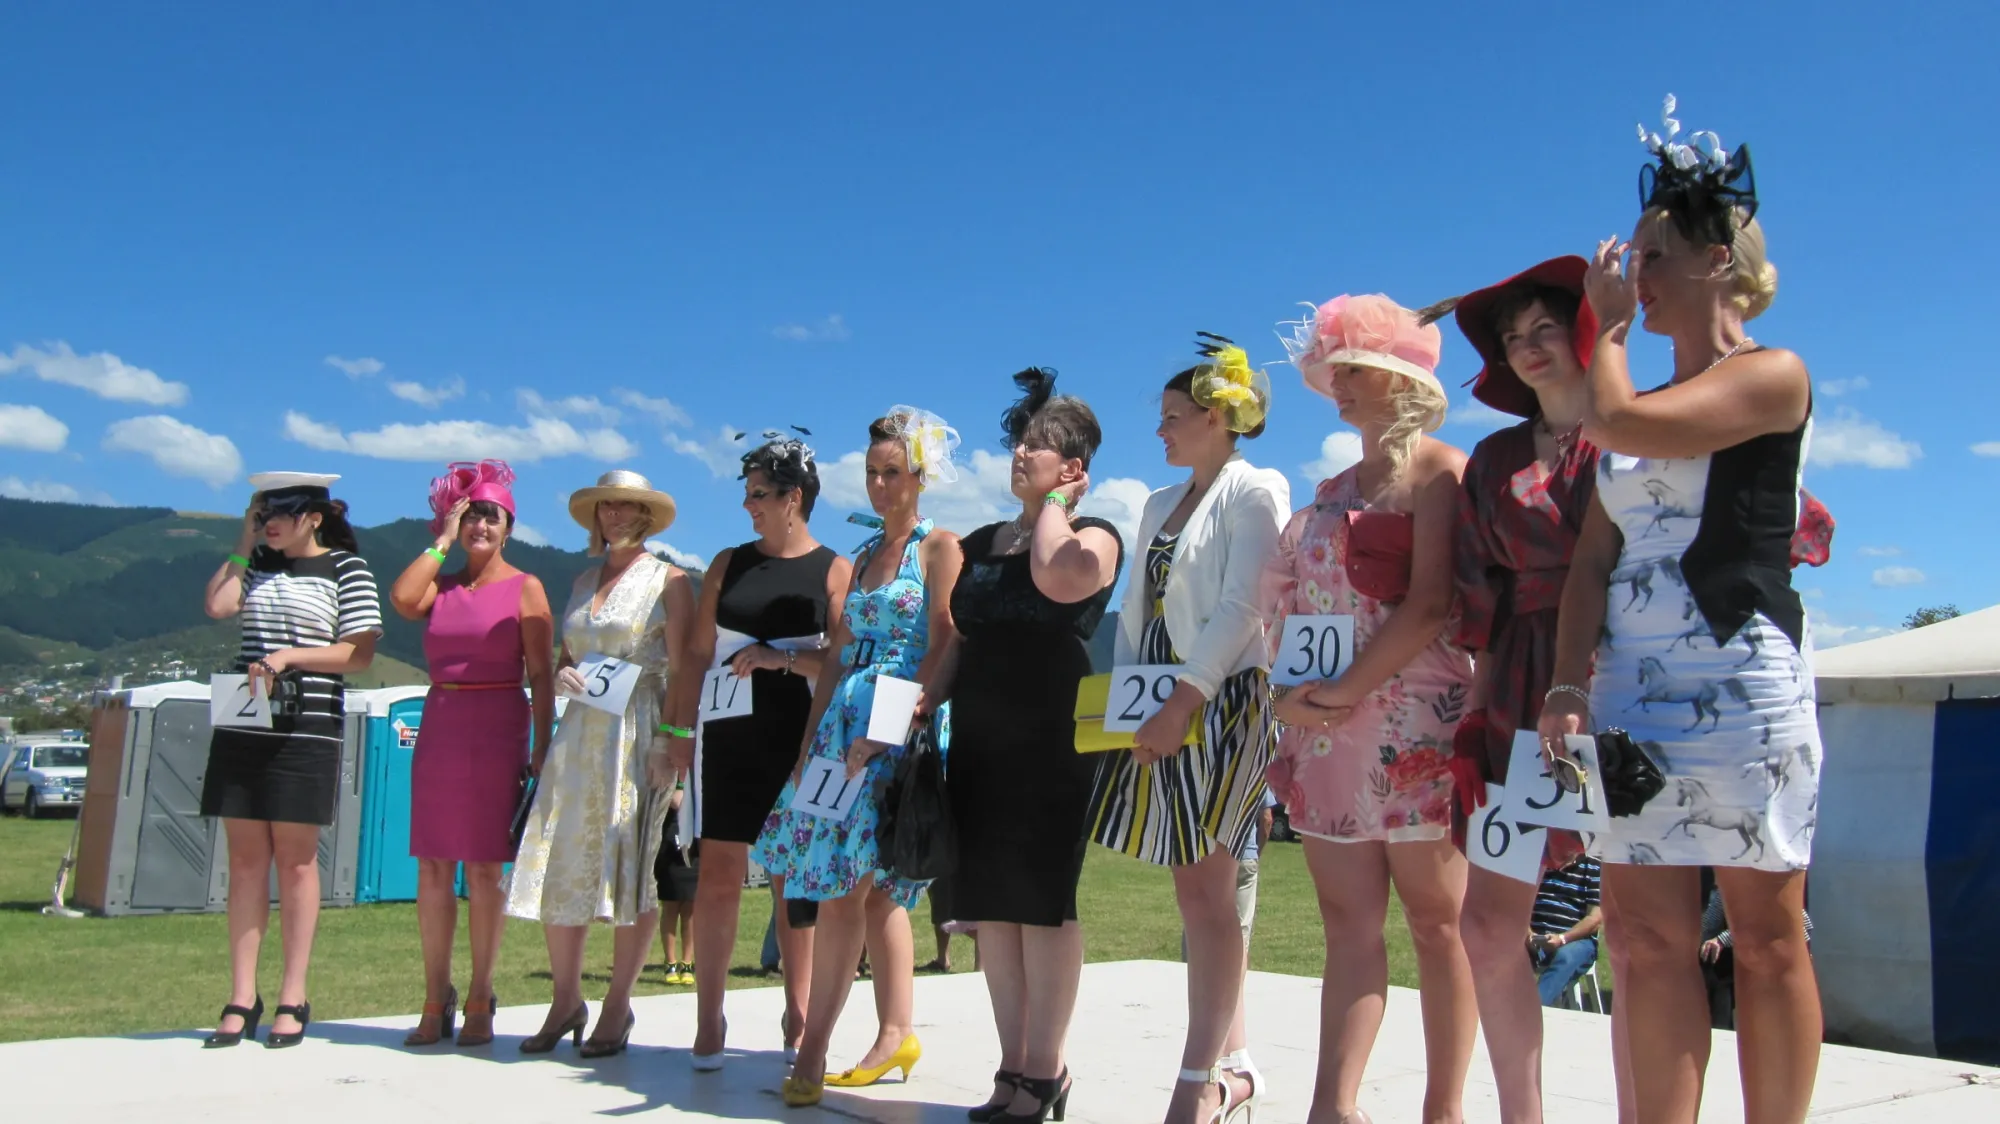 Best Dressed women - Fashion in the field at Nelson harness races summer festival